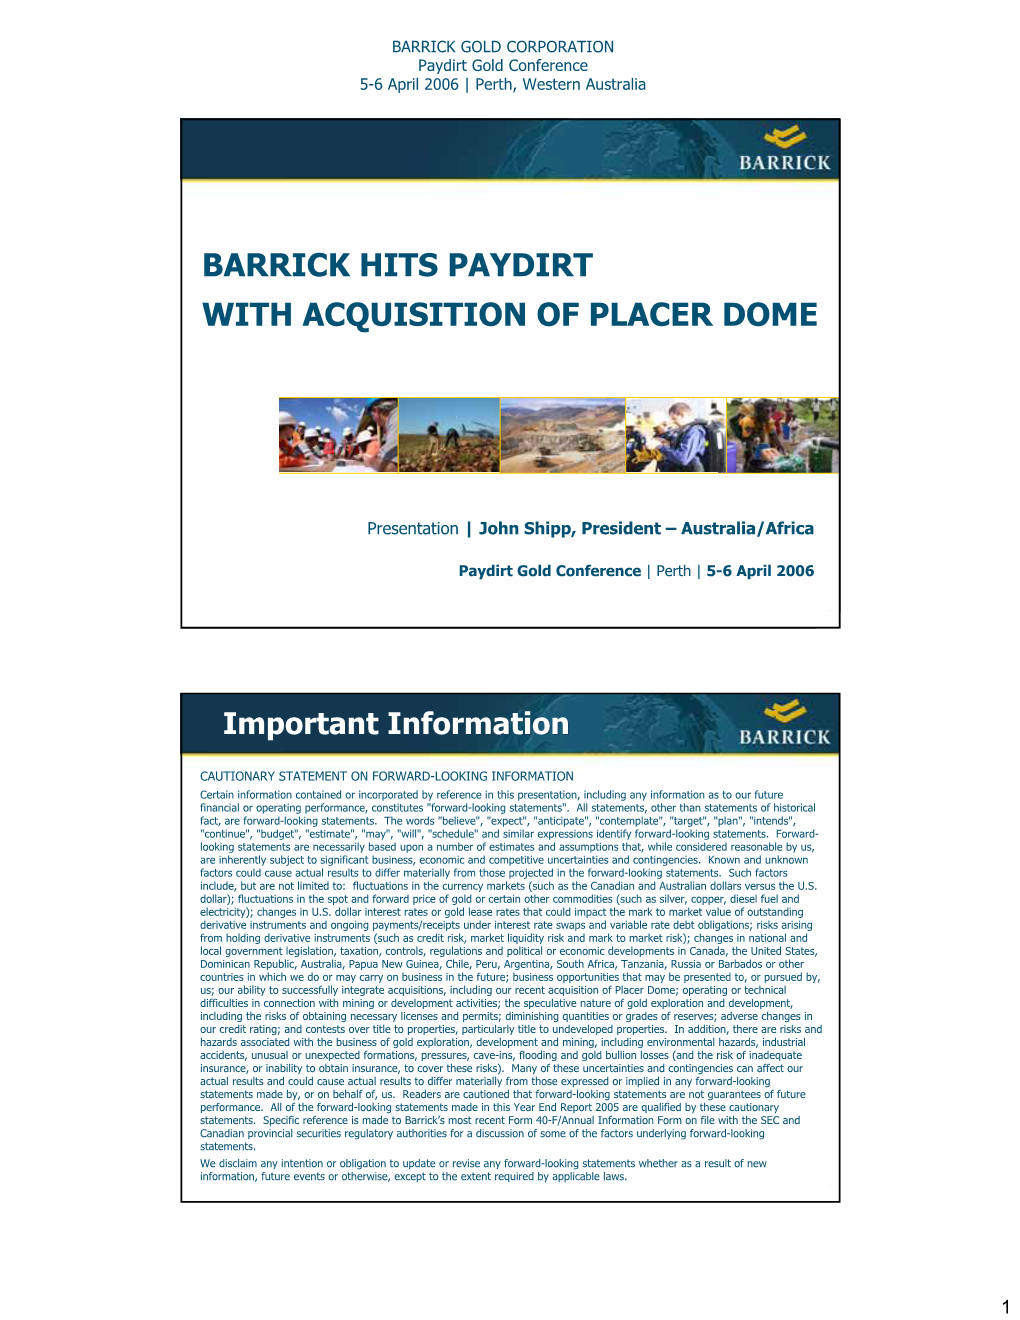 Barrick Hits Paydirt with Acquisition of Placer Dome